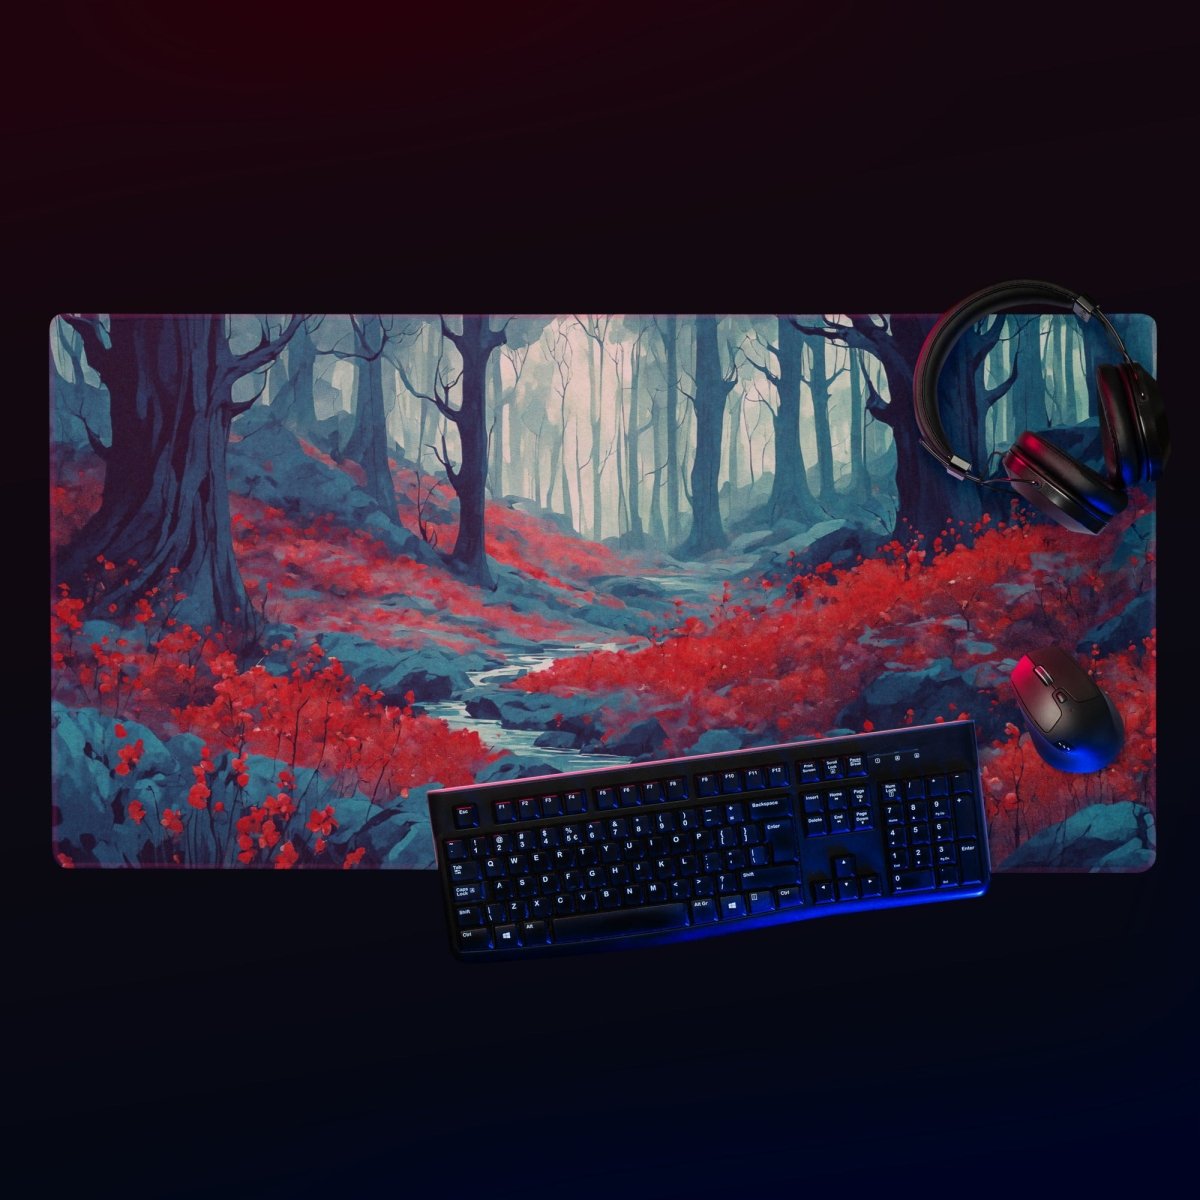 Crimson spring - Gaming mouse pad - Ever colorful